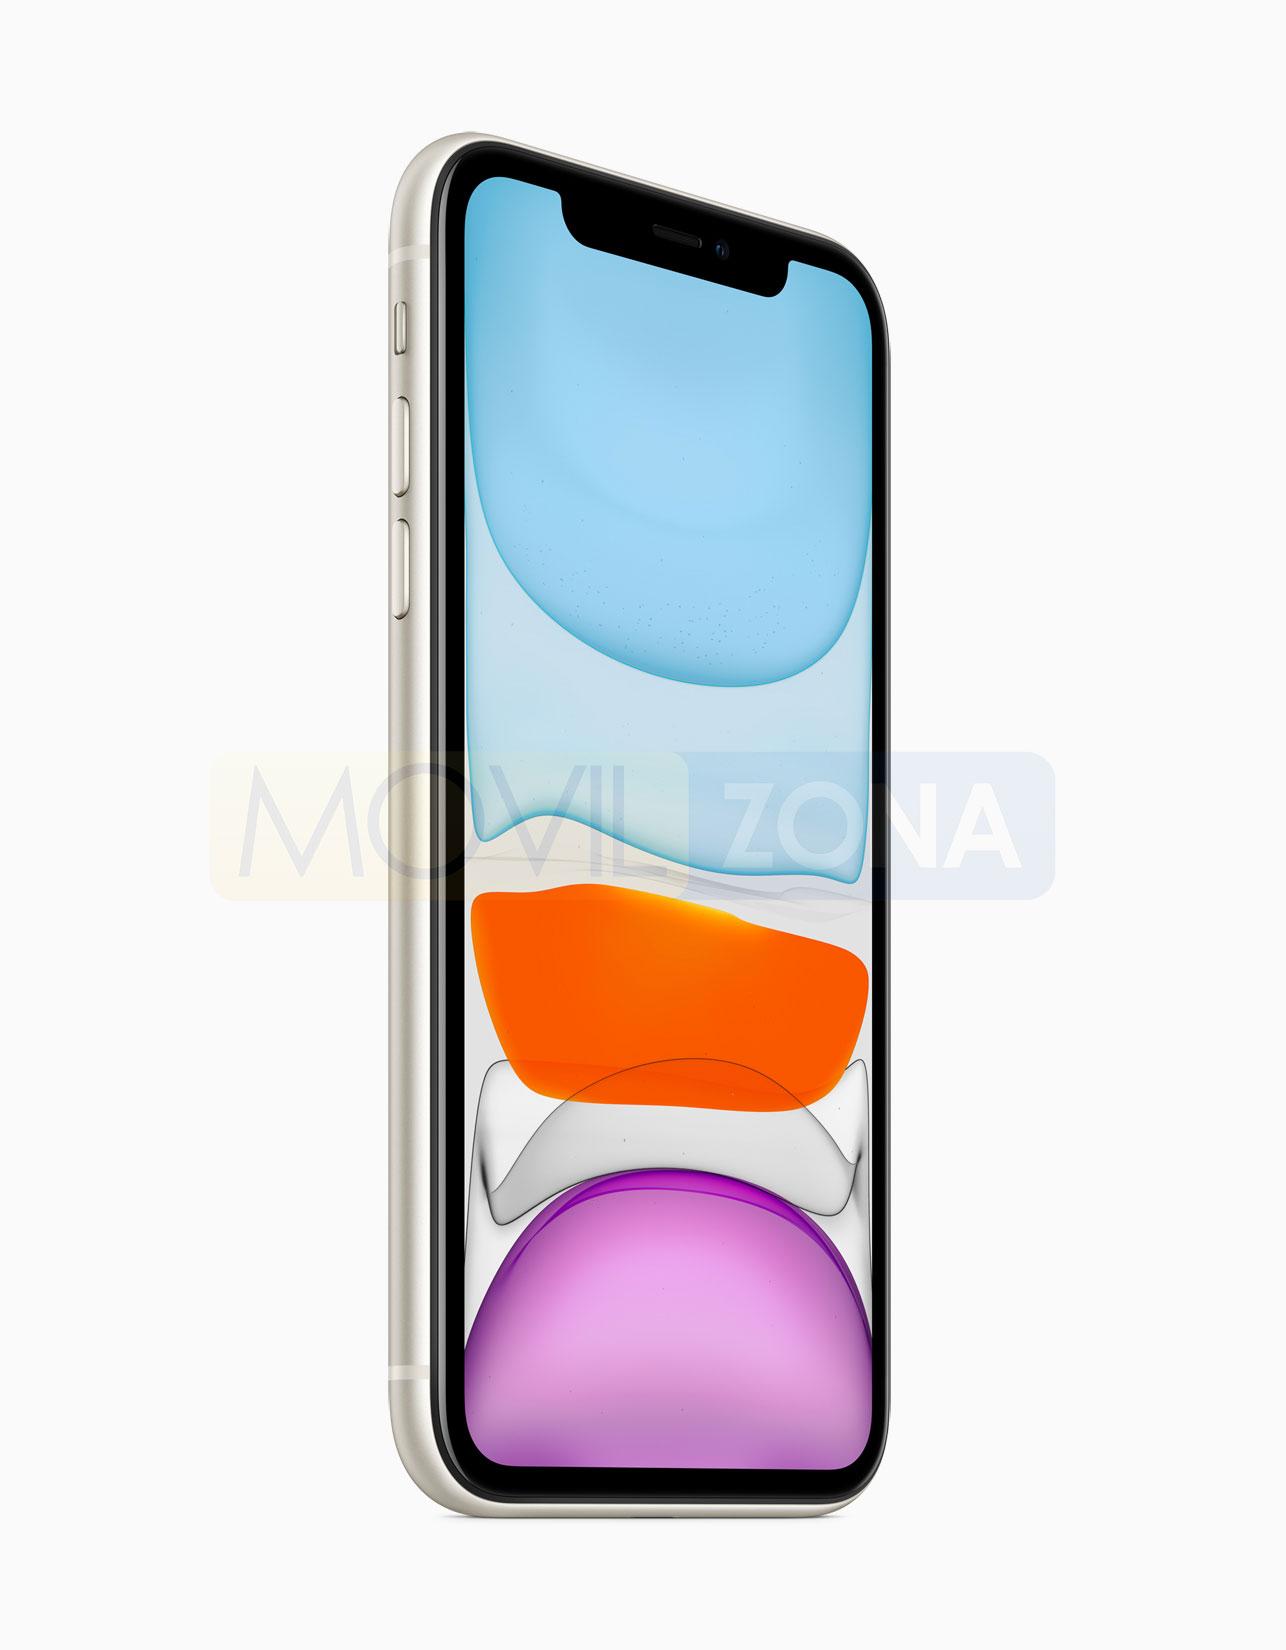 Apple iPhone 11 frontal